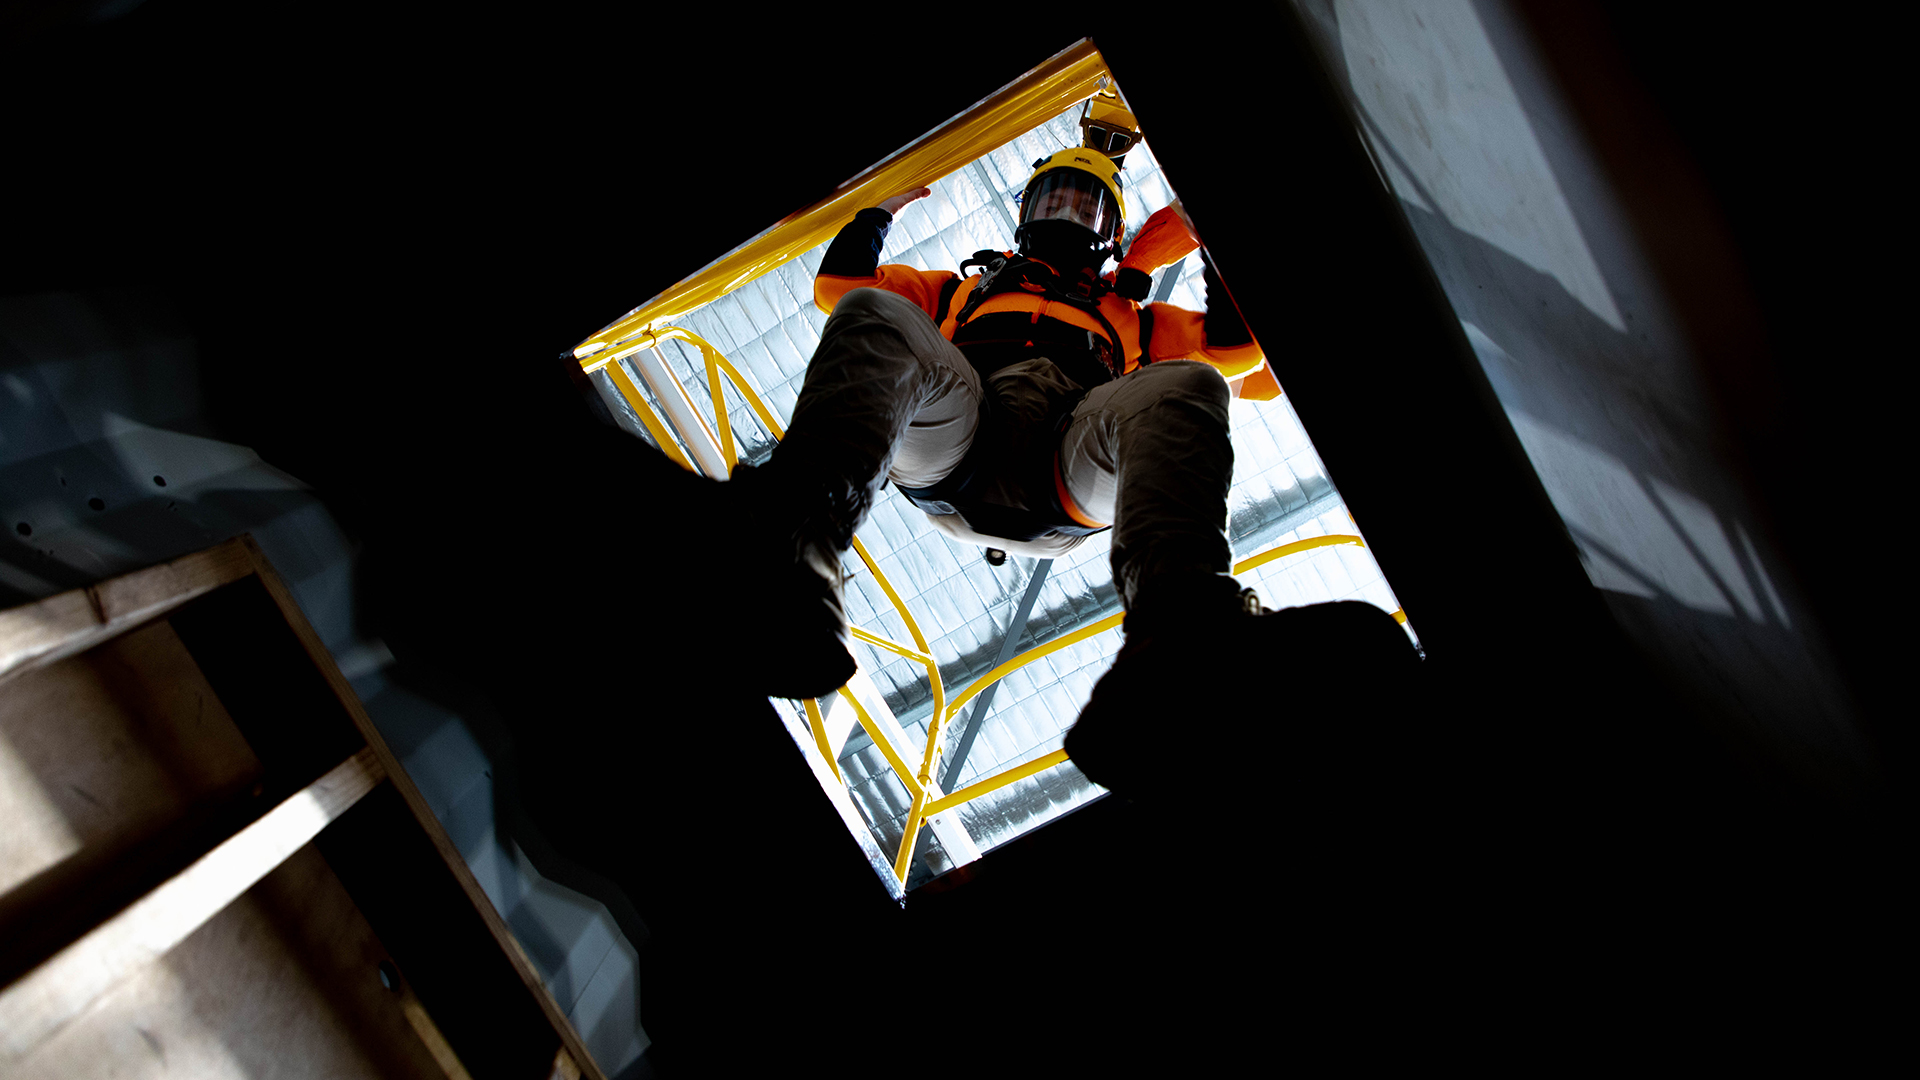 Worker, wearing breathing apparatus, entering a confined space.